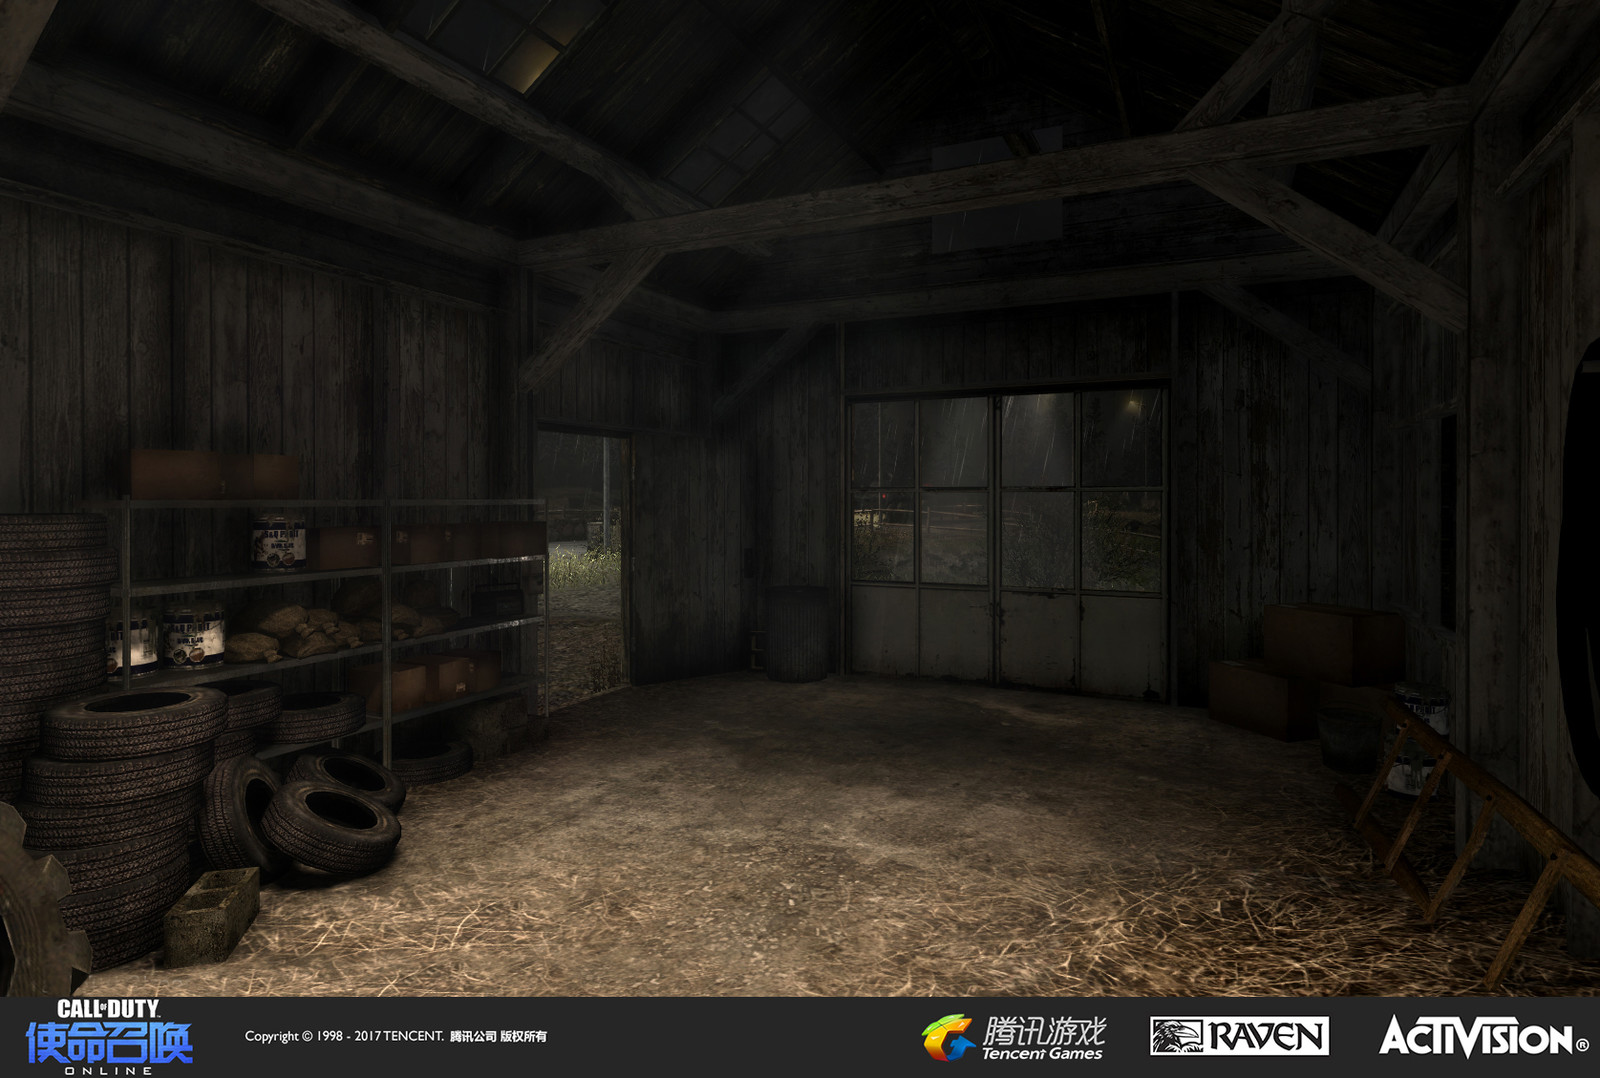 Farm: An expansion of a C-130 mission in Modern Warfare. This is a survivor rescue objective, for which I built the interior geo, textures, and set dress.